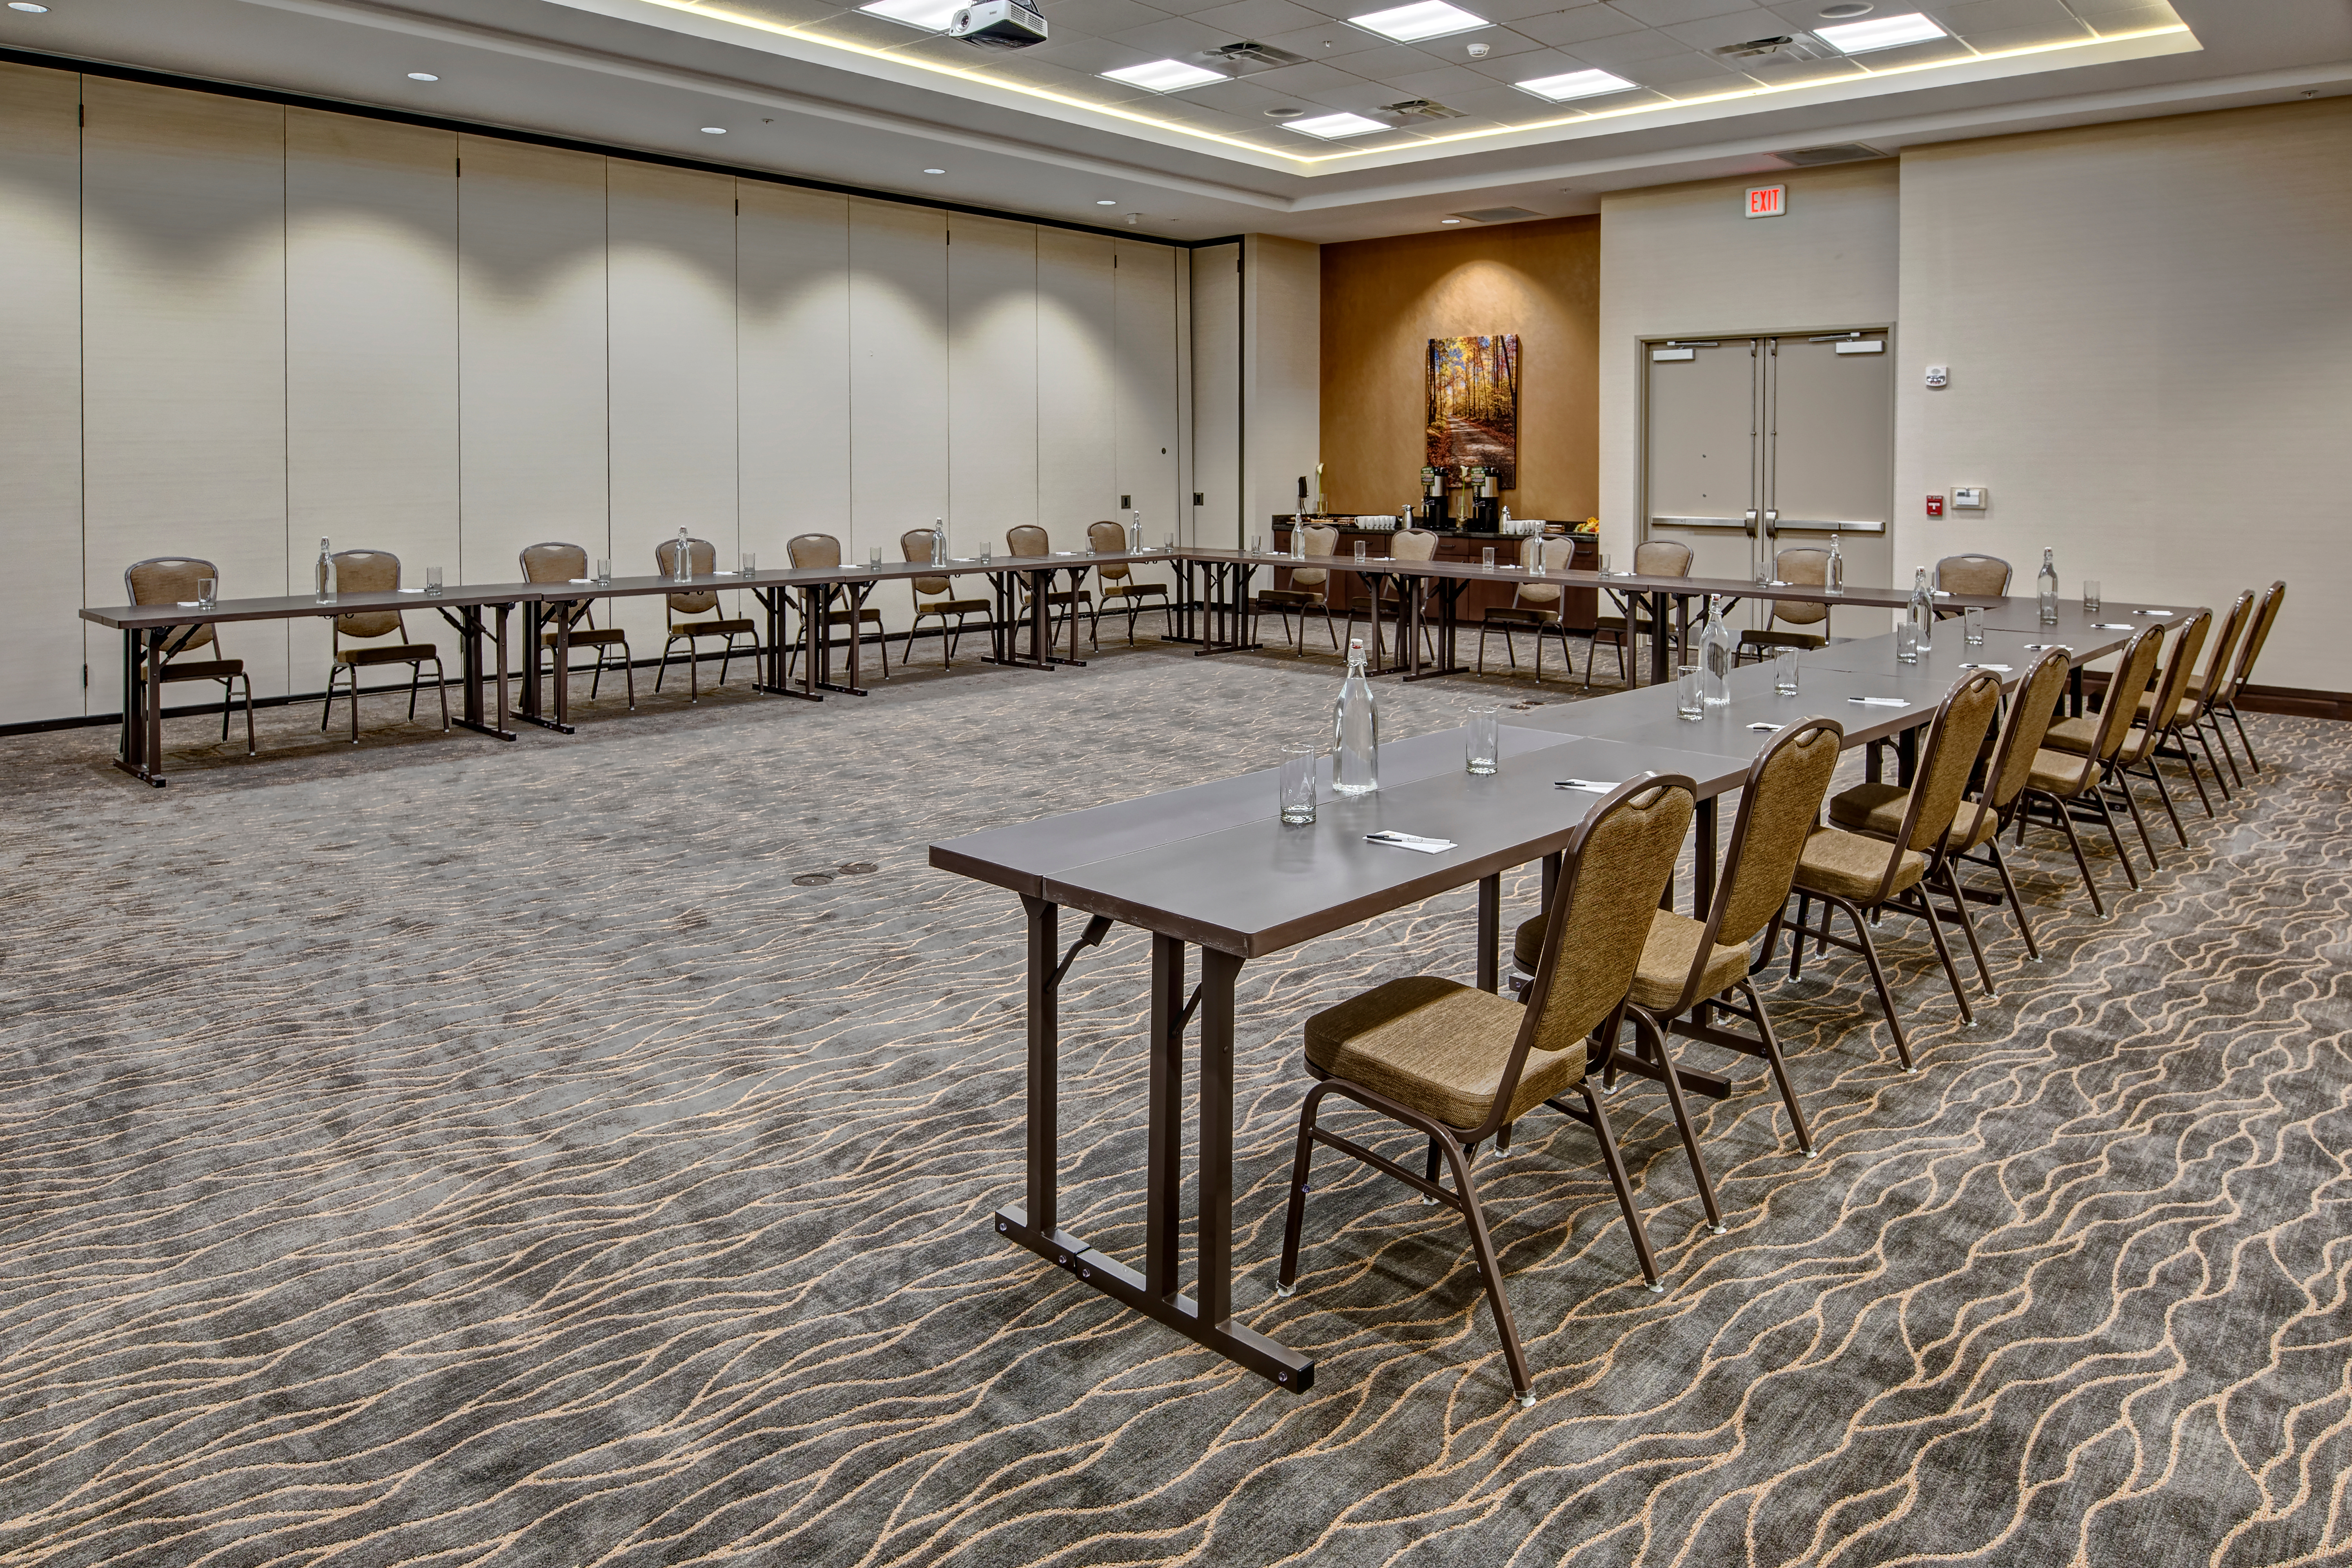 Meeting Room With U-Shaped Table, Chairs, and Refreshments Table